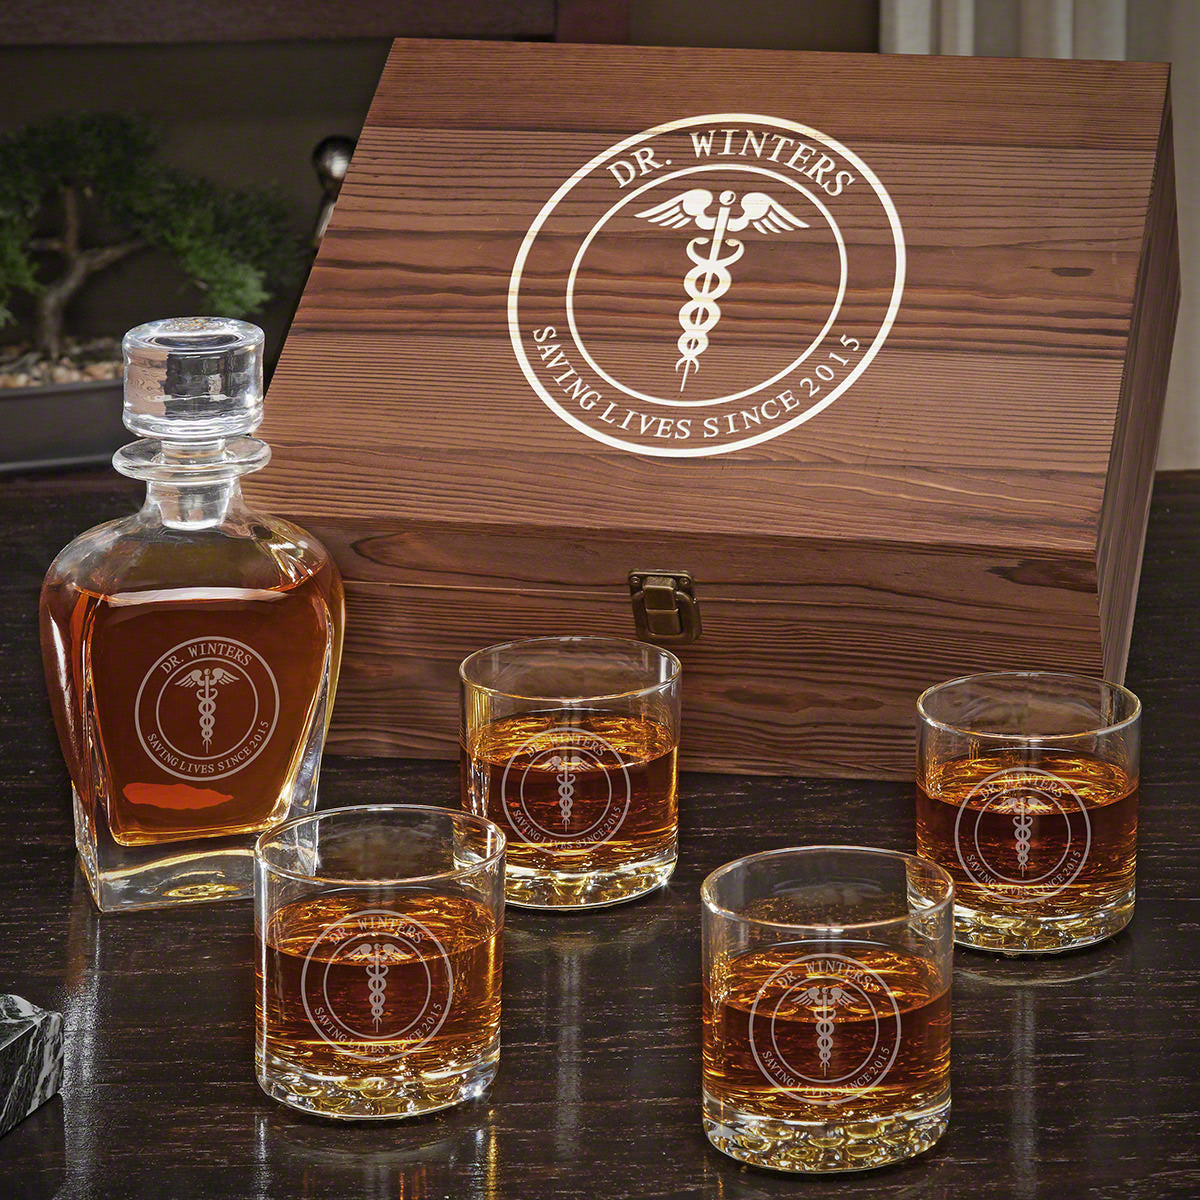 Personalized Whiskey Draper Decanter Set with Buckman Glasses - Gift for Doctors